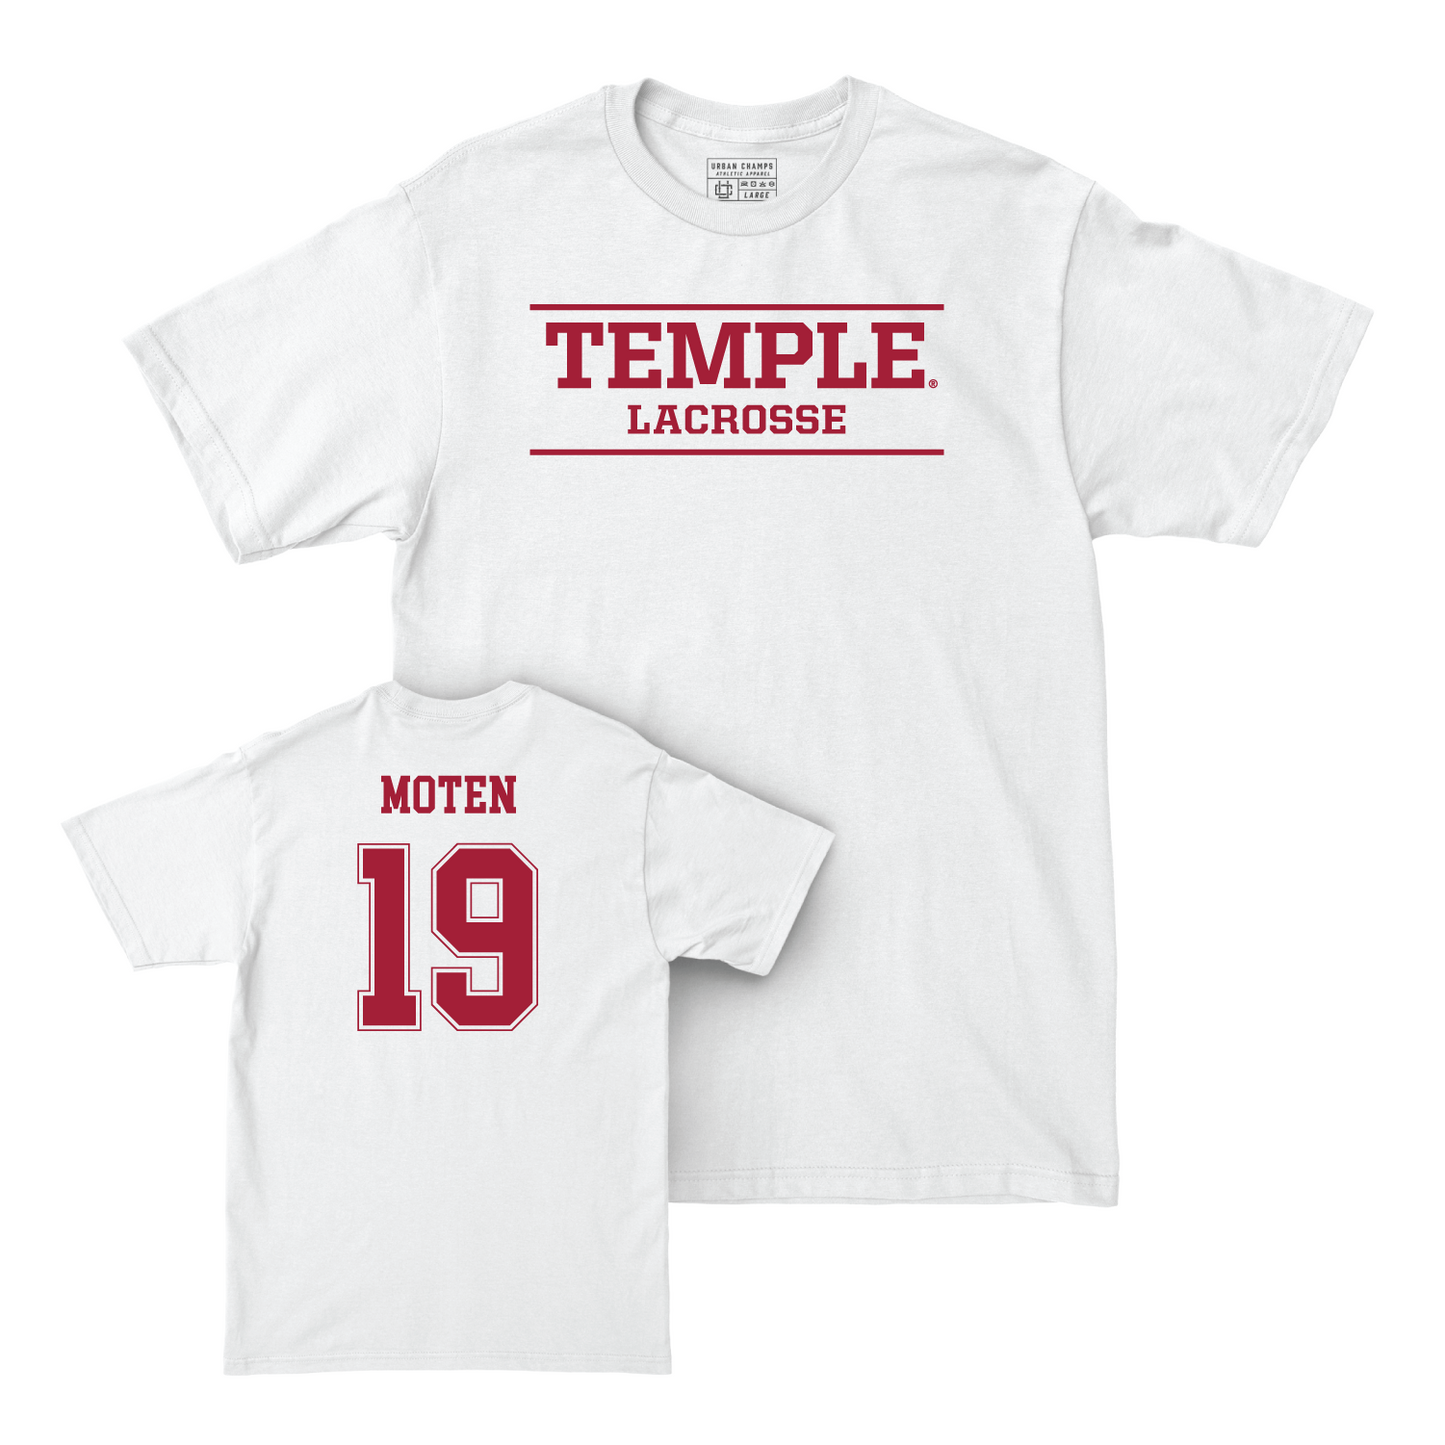 Women's Lacrosse White Classic Comfort Colors Tee - Madison Moten Youth Small